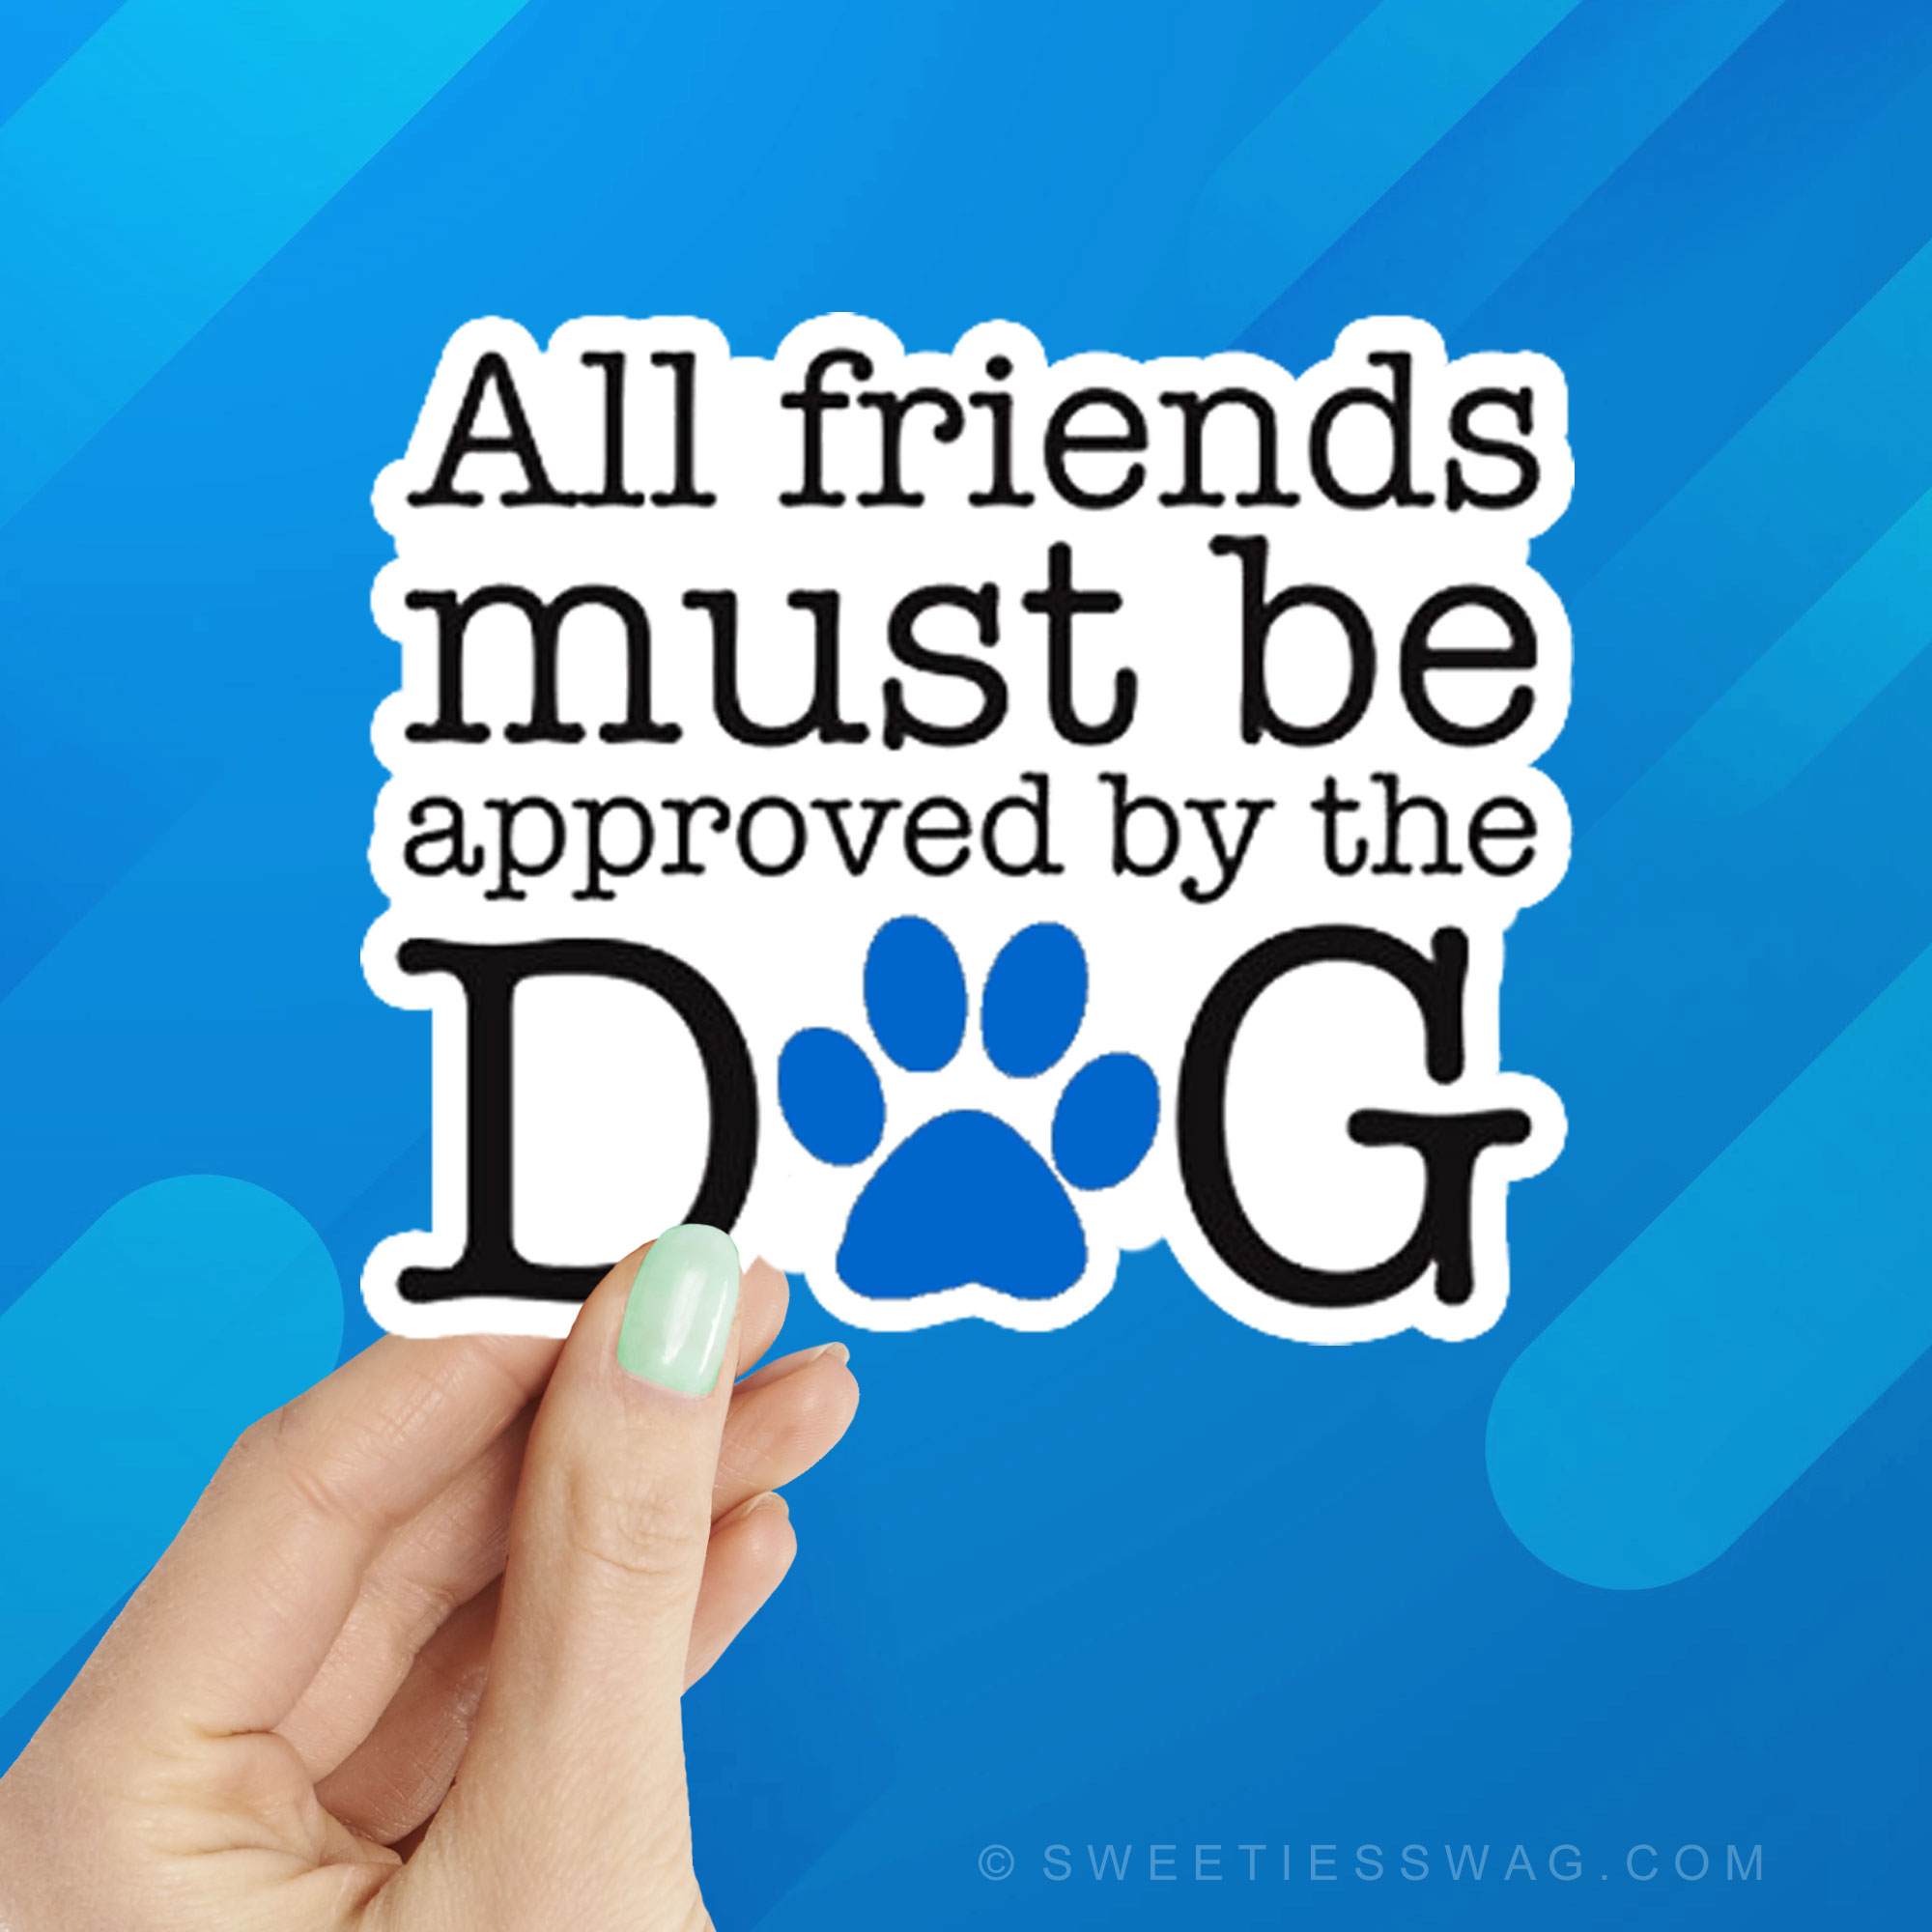 All Friends Must be Approved by the Dog Laptop Water Bottle Sticker